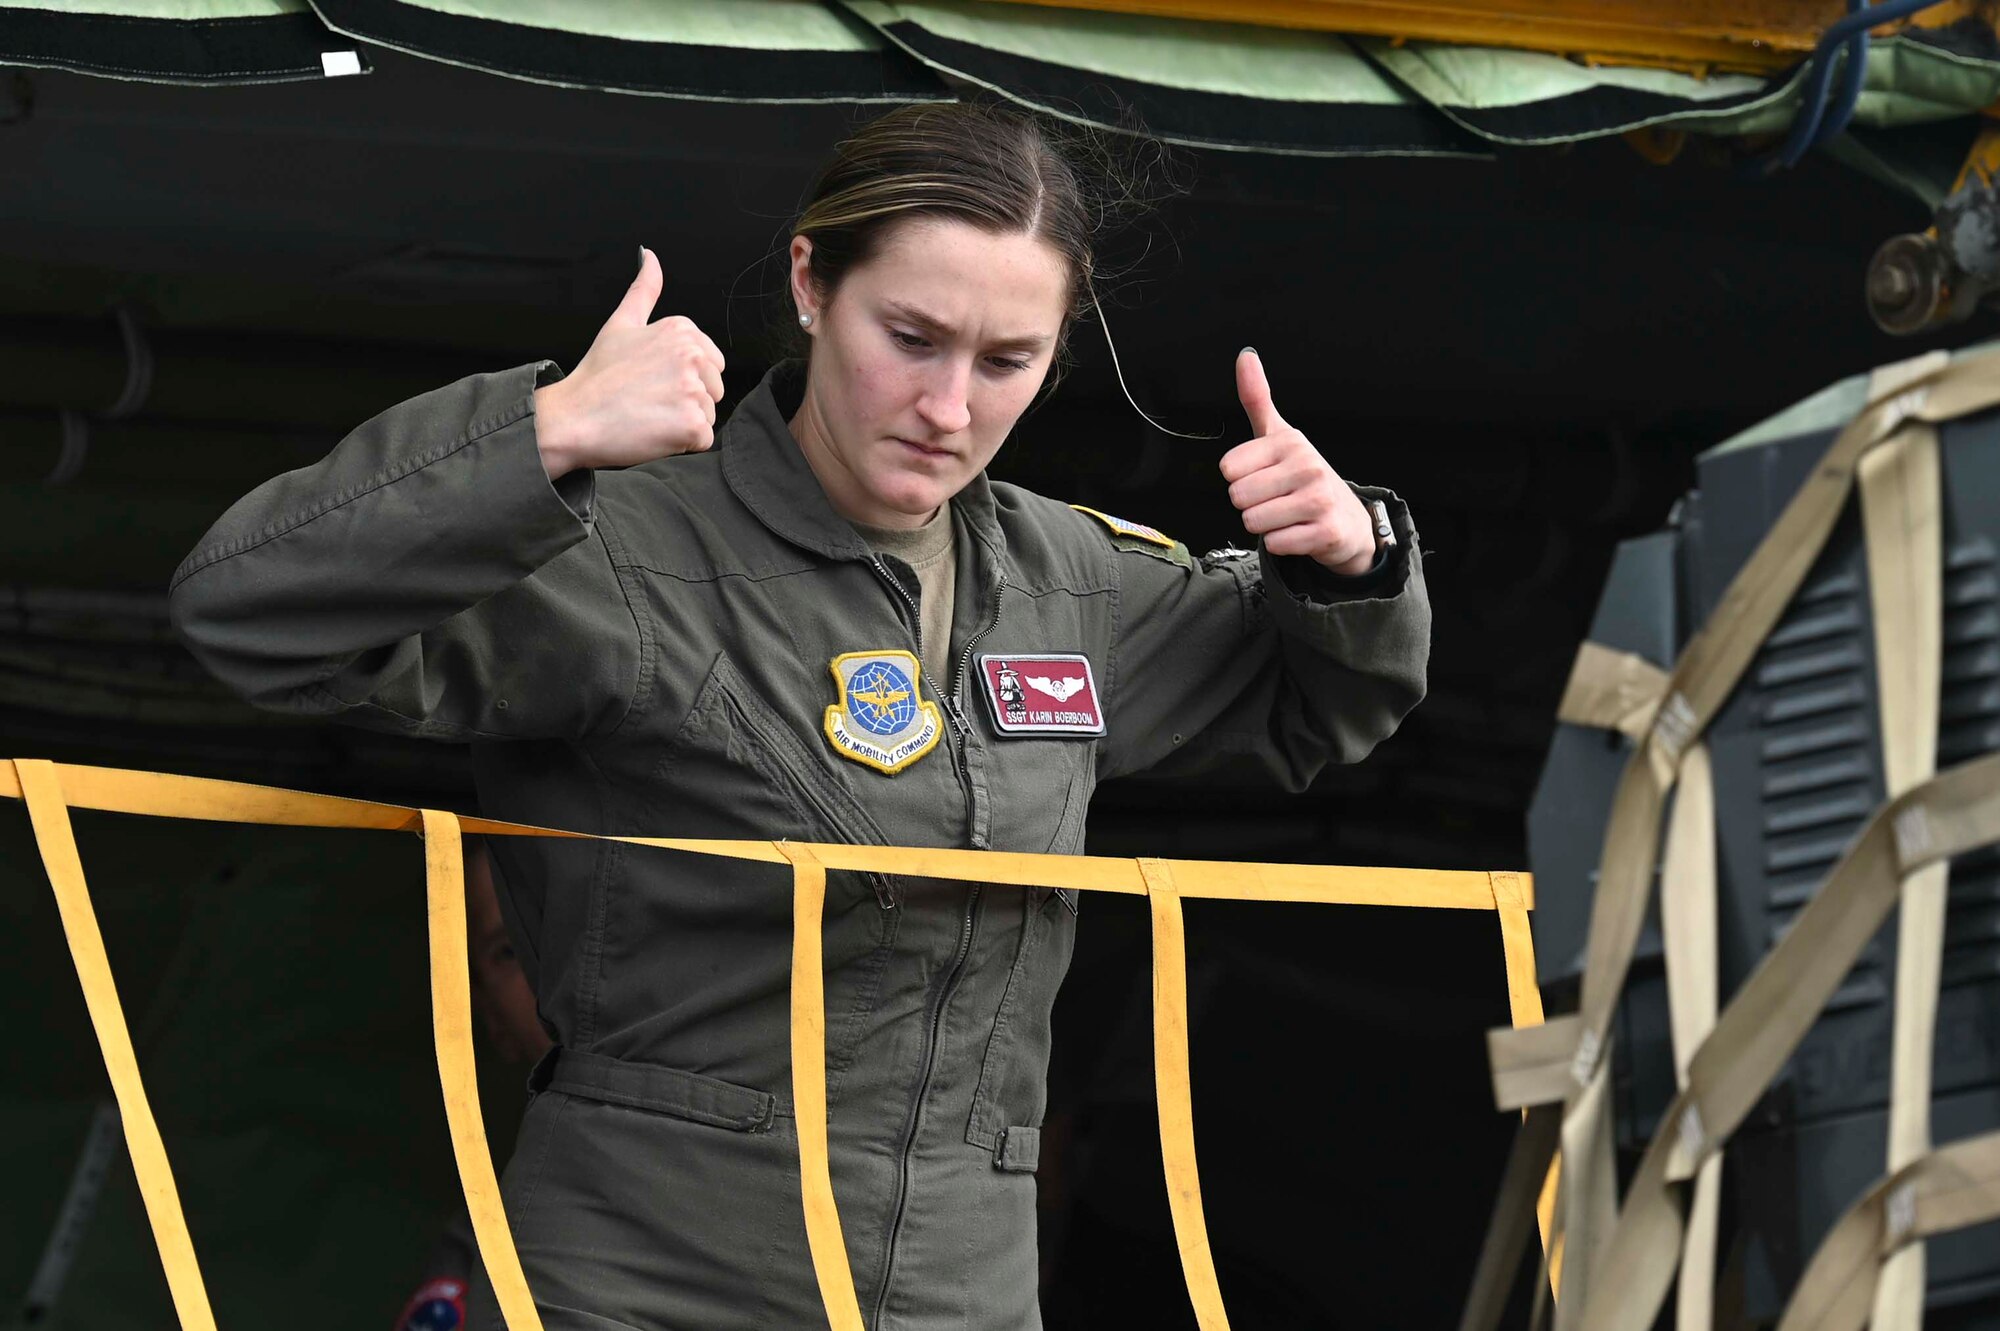 U.S. Air Force Staff Sgt. Karin Boerboom uses hand signal to instruct other Airmen on how to maneuver cargo into a KC-135 Stratotanker